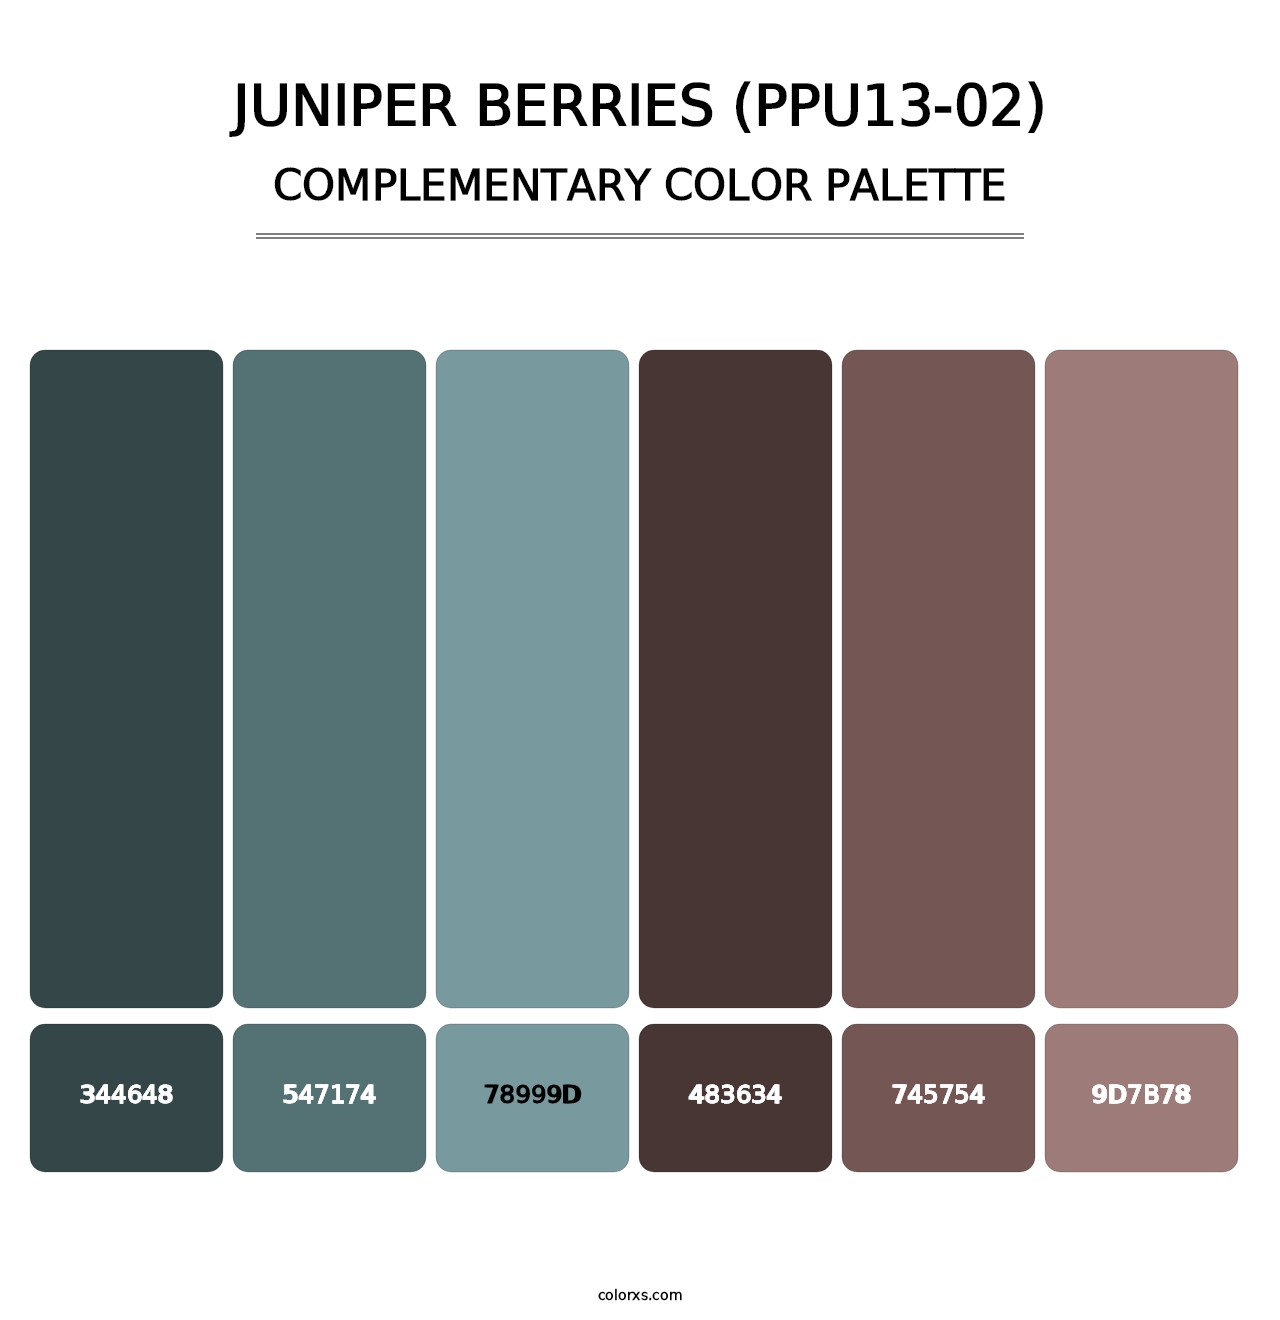 Juniper Berries (PPU13-02) - Complementary Color Palette